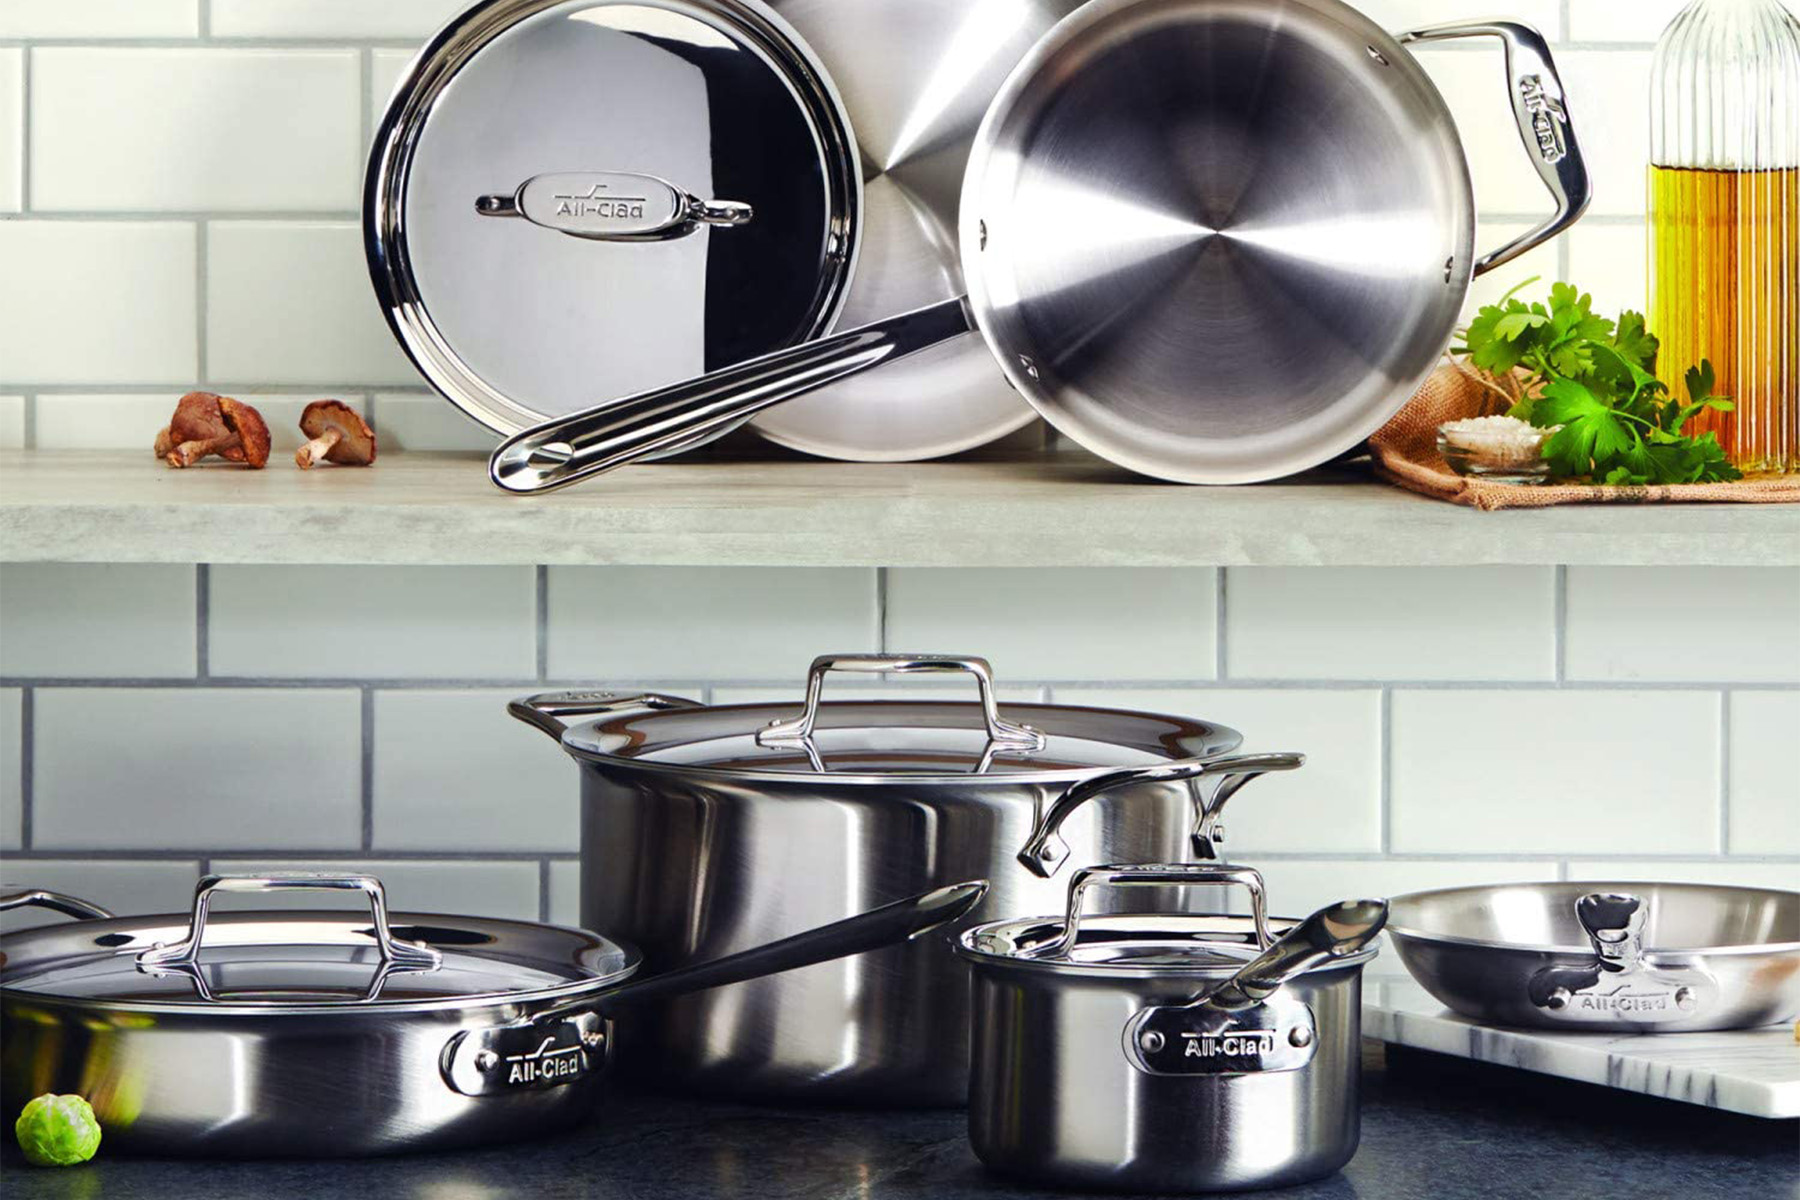 best stainless steel cookware